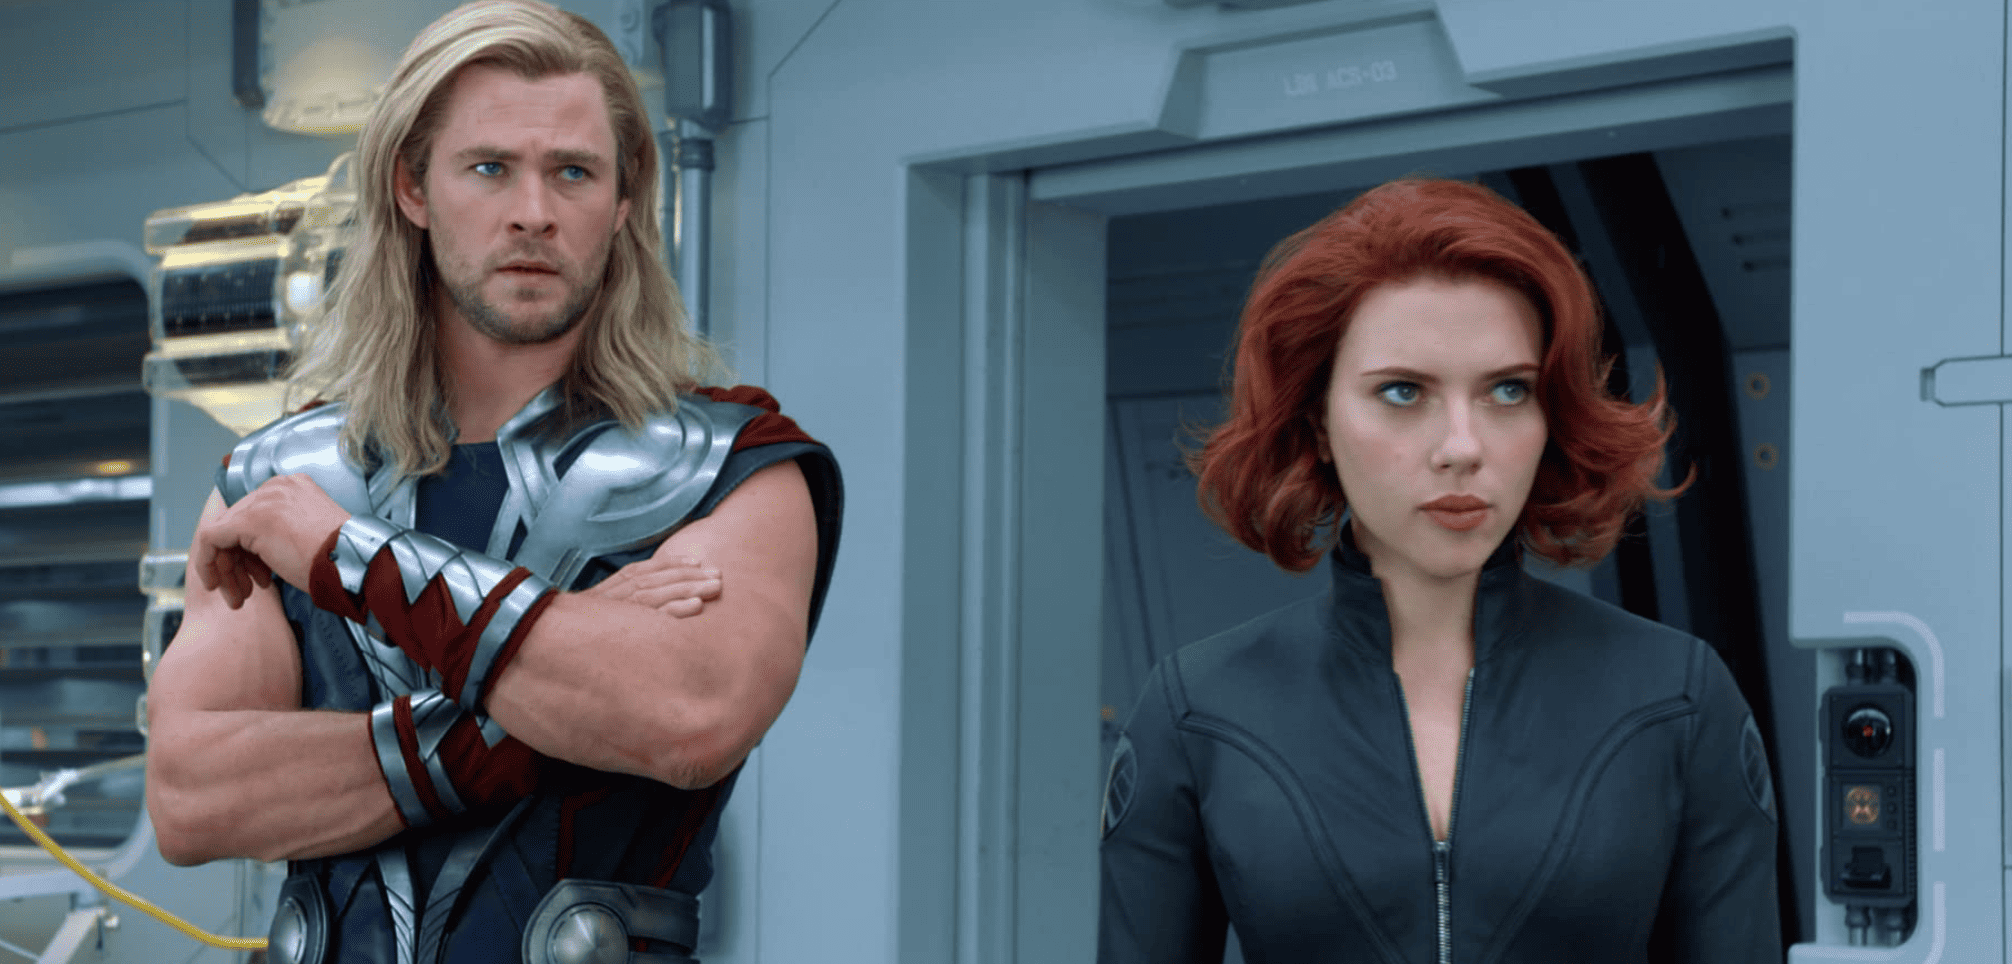 Thor and the Black Widow stand side by side during a meeting in this image from Marvel Studios